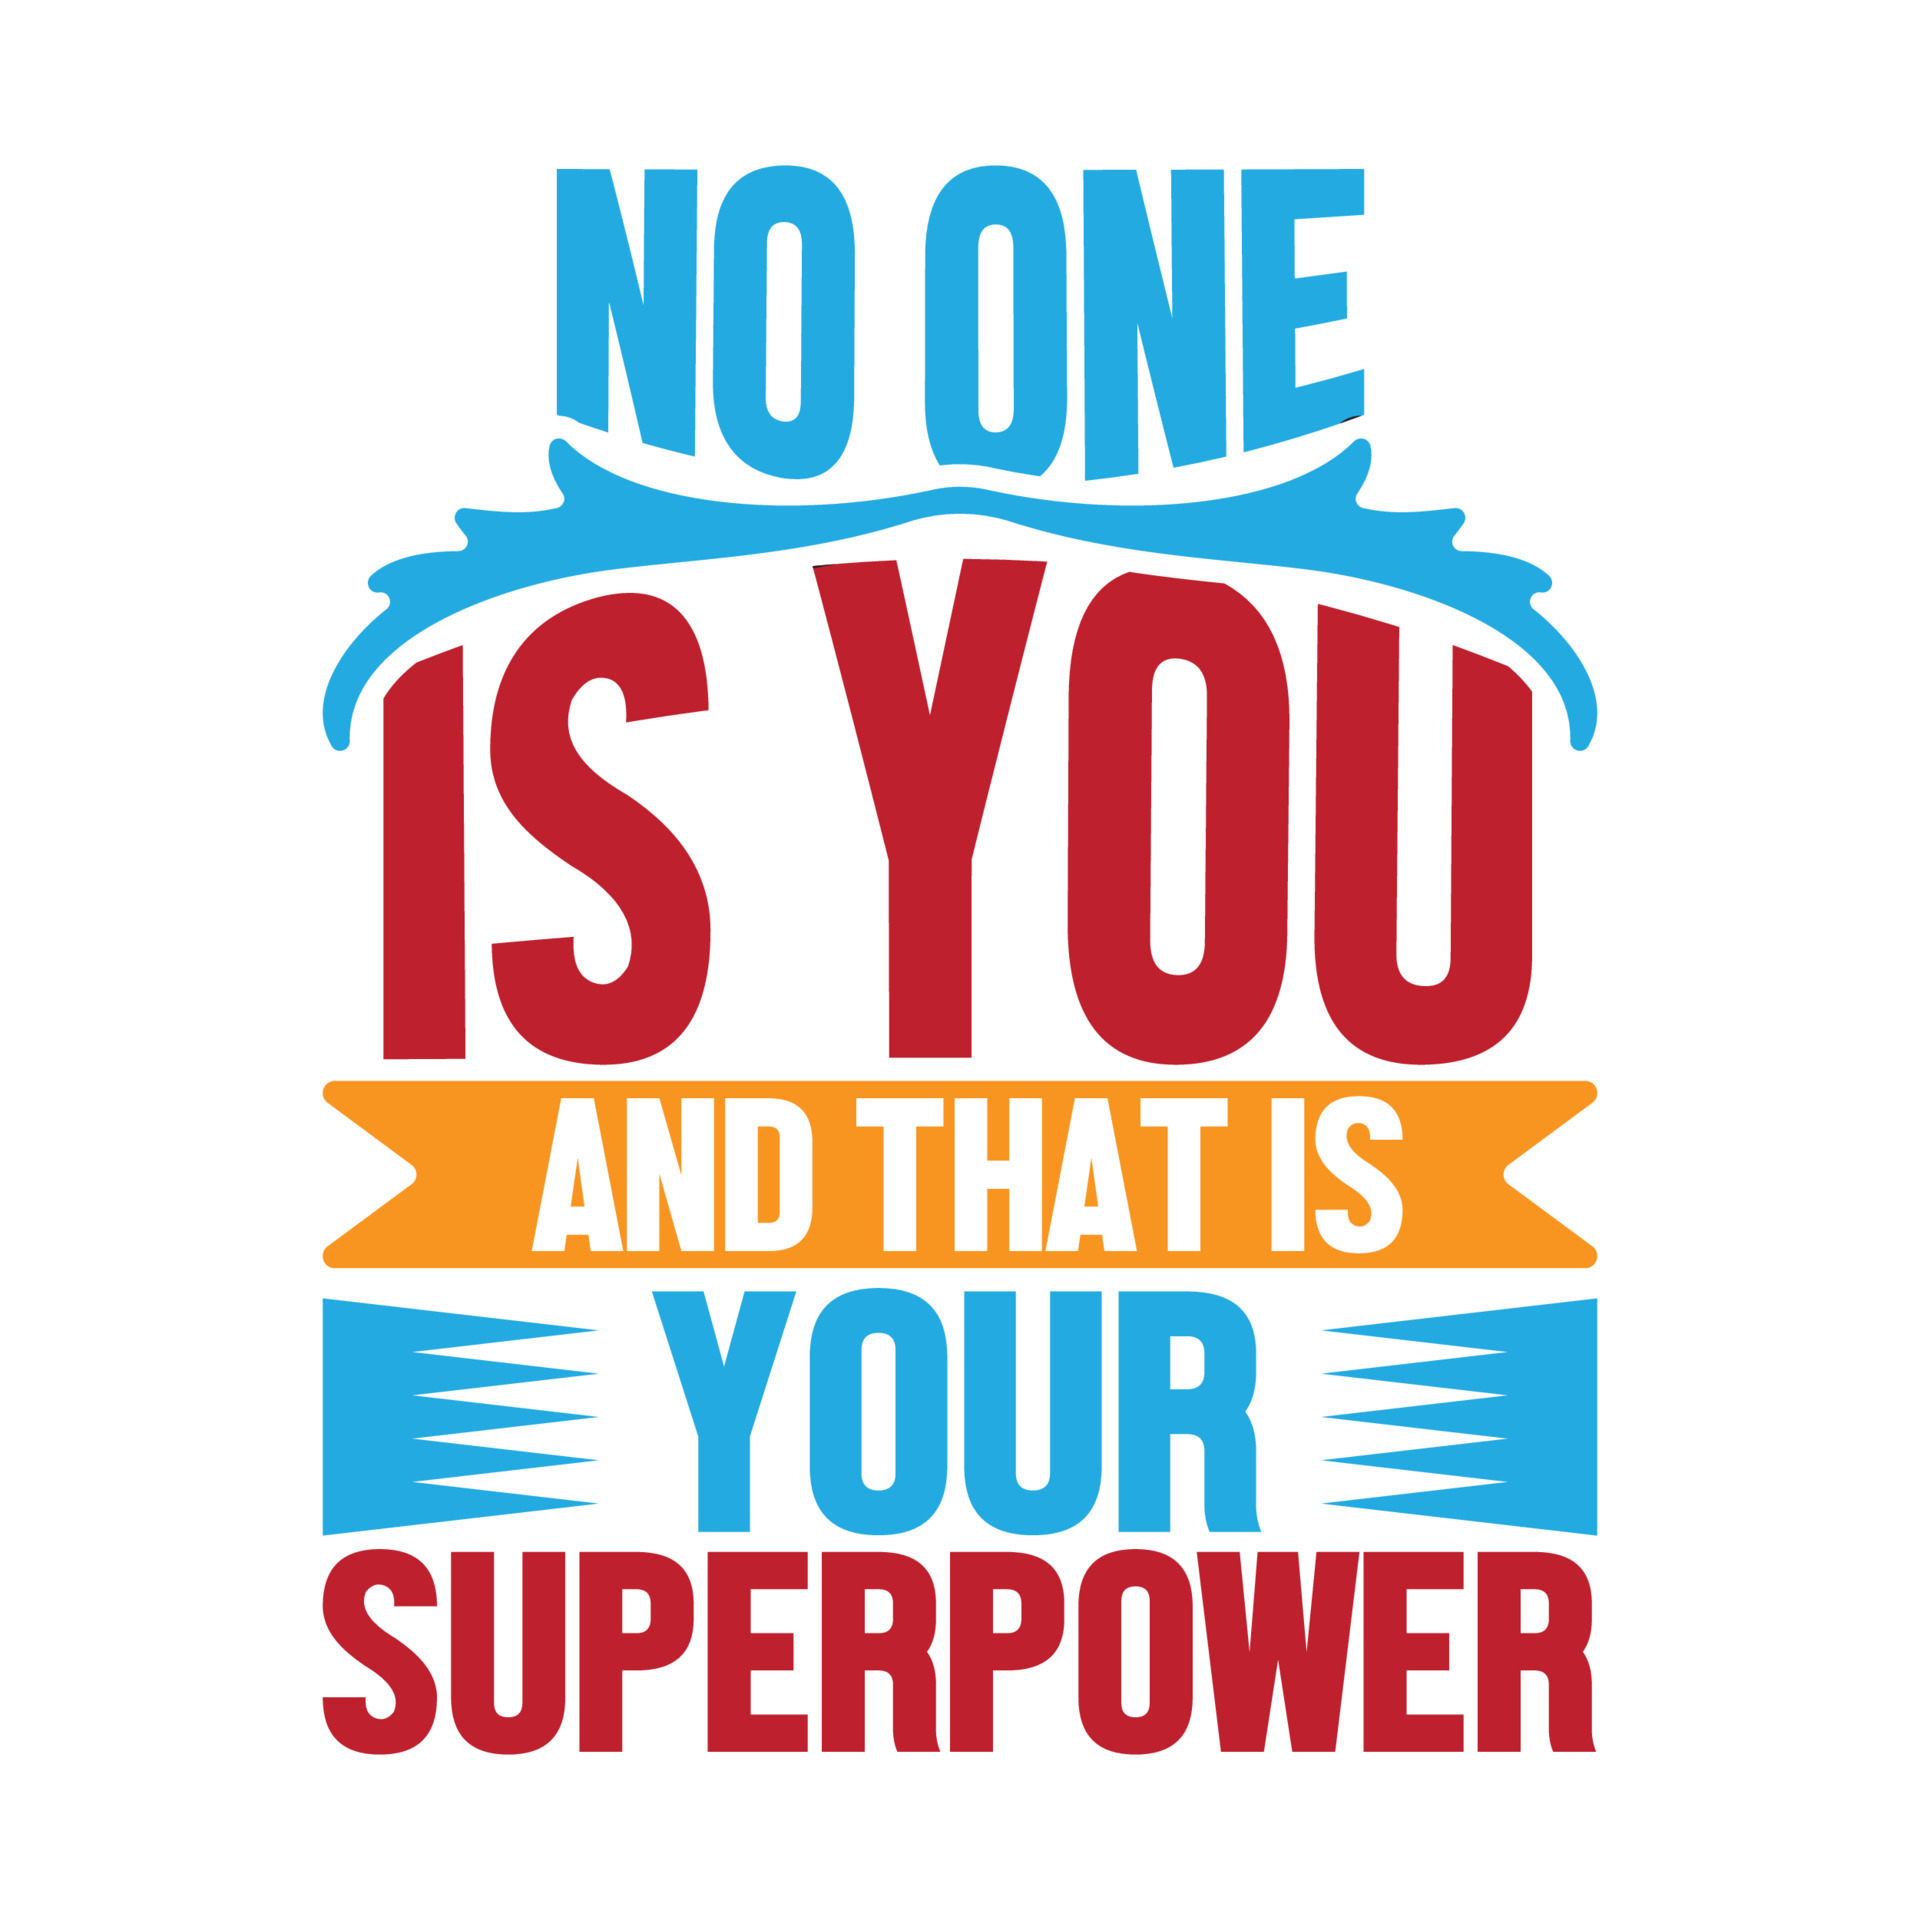 https://static.vecteezy.com/system/resources/previews/012/956/873/original/no-one-is-you-and-that-is-your-superpower-inspirational-and-motivational-saying-illustration-vector.jpg